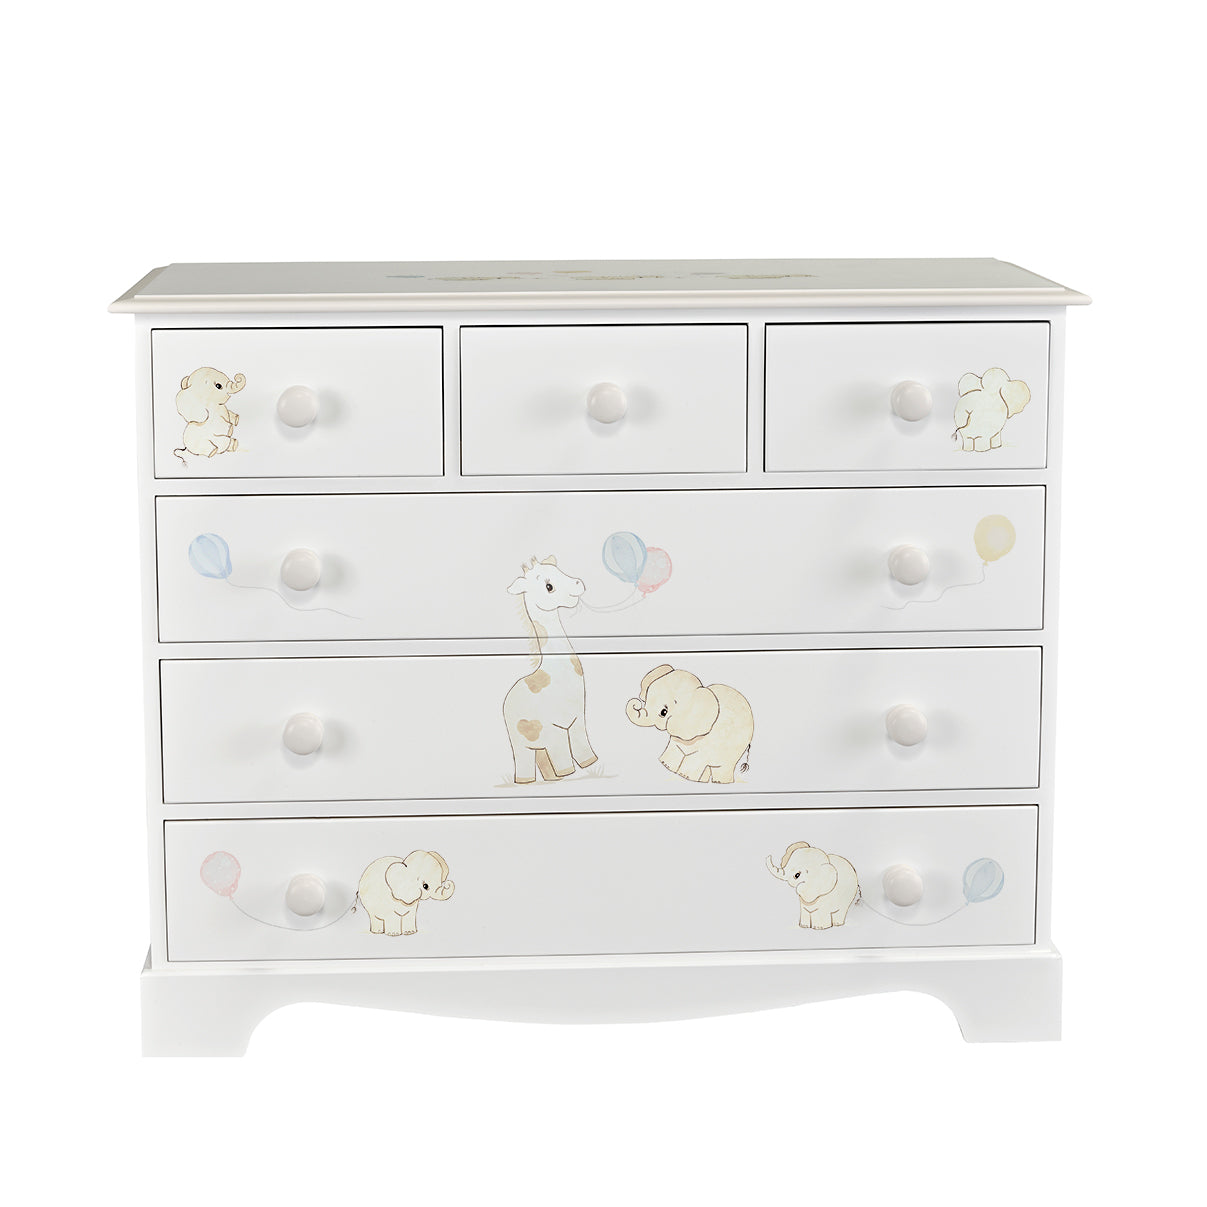 Extra Large Chest of Drawers - Playful Elephants with Soft Jute Trim